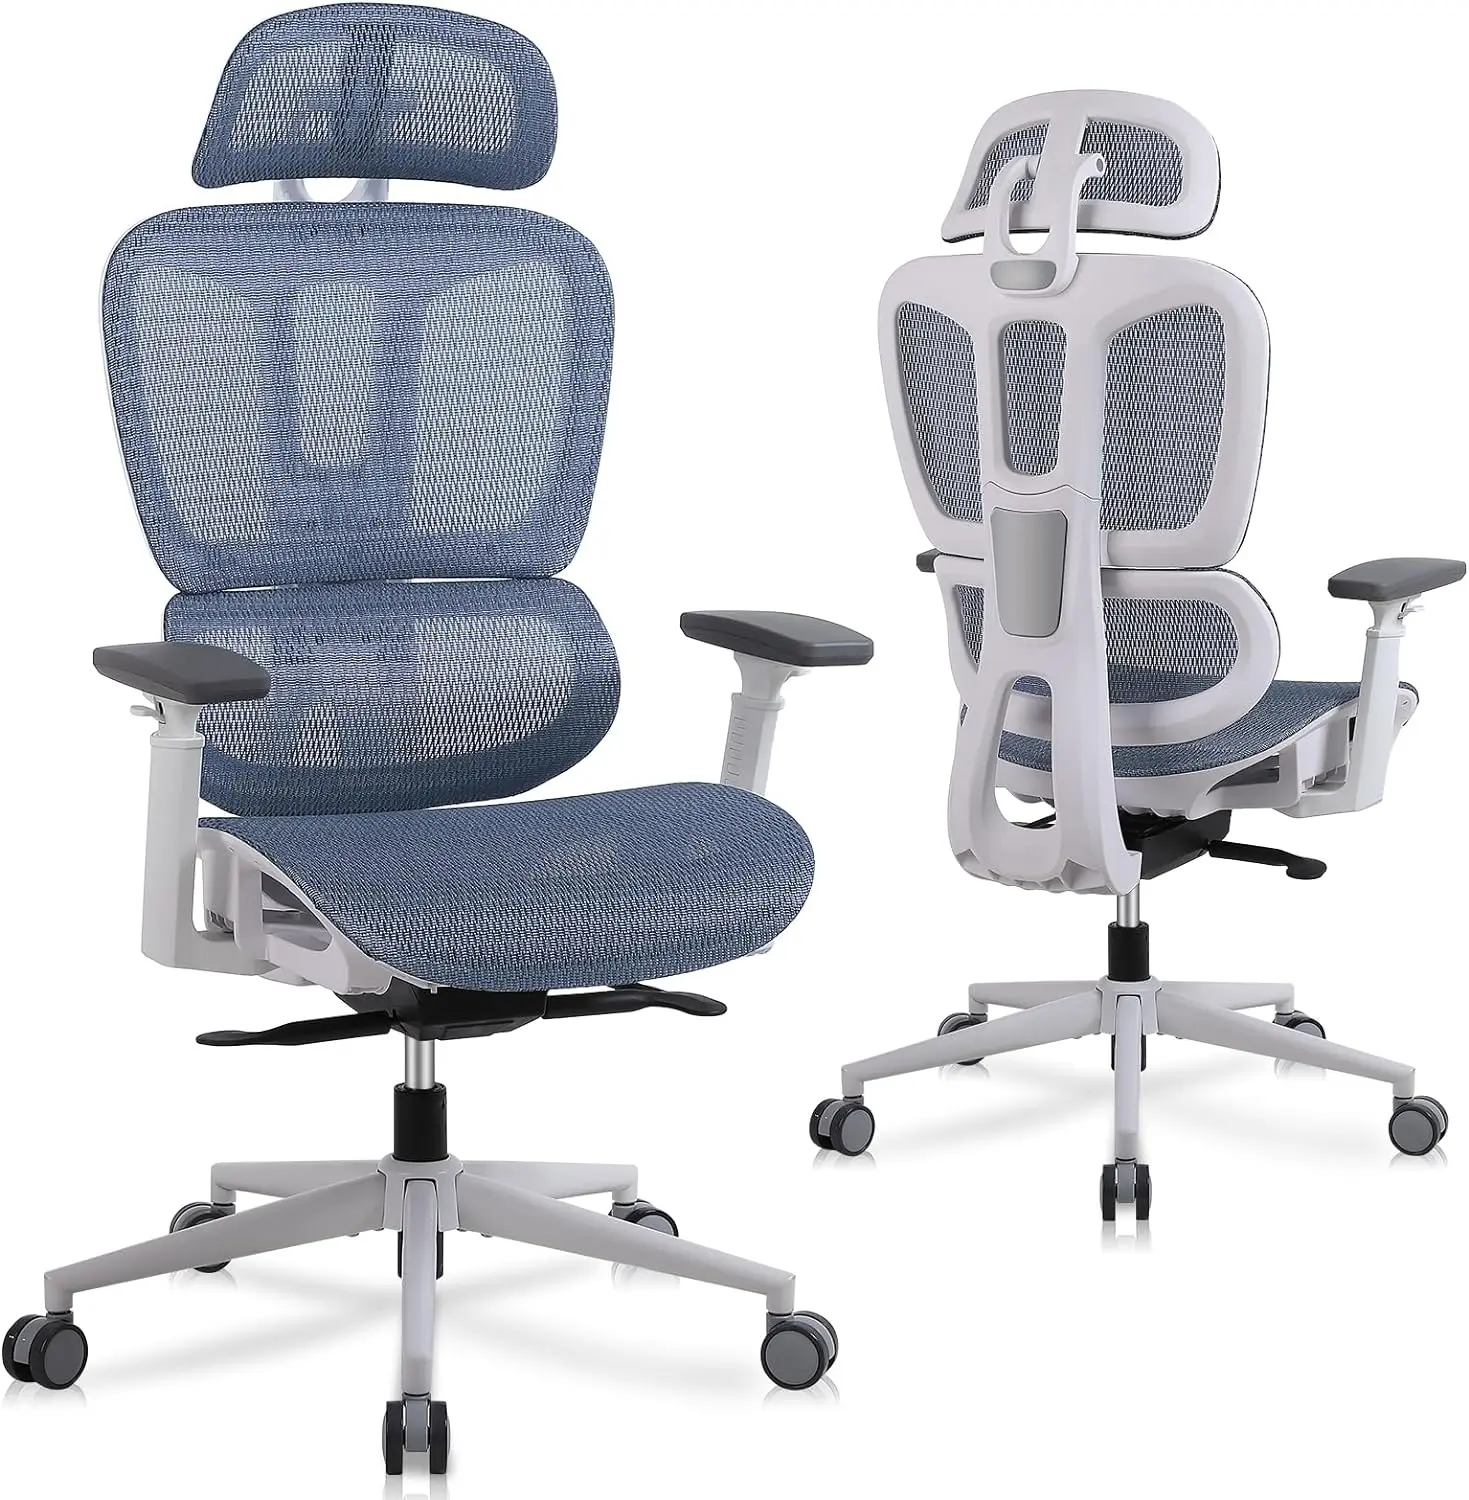 

High Back Home Office Chairs with Adjustable Seat Depth, 3D Armrests & Headrest, Rolling Desk Chair, Mesh Computer Chair, Blue